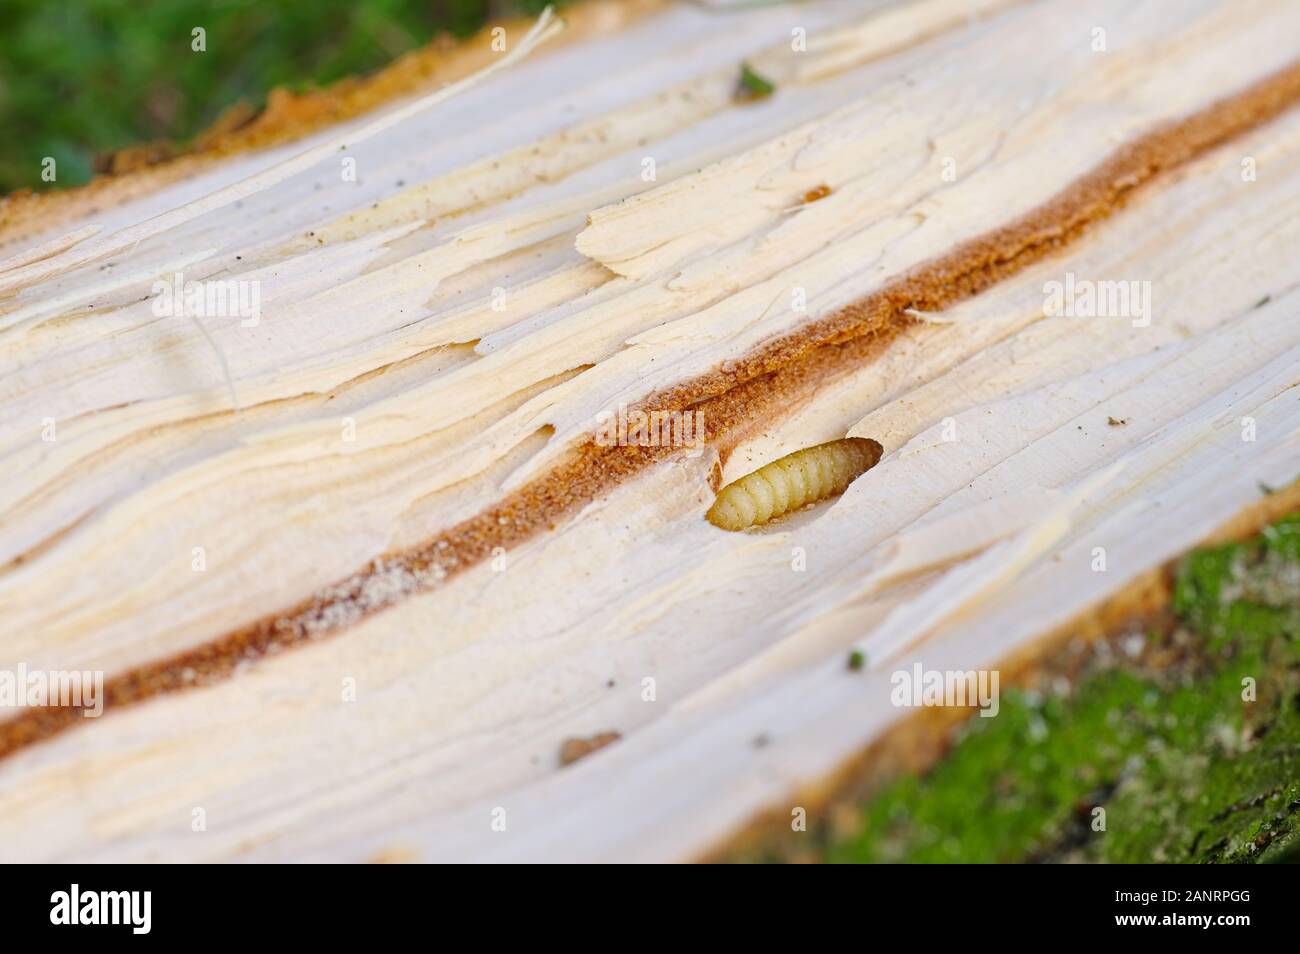 Bark Beetle pupae and galleries in spruce  wood Stock Photo